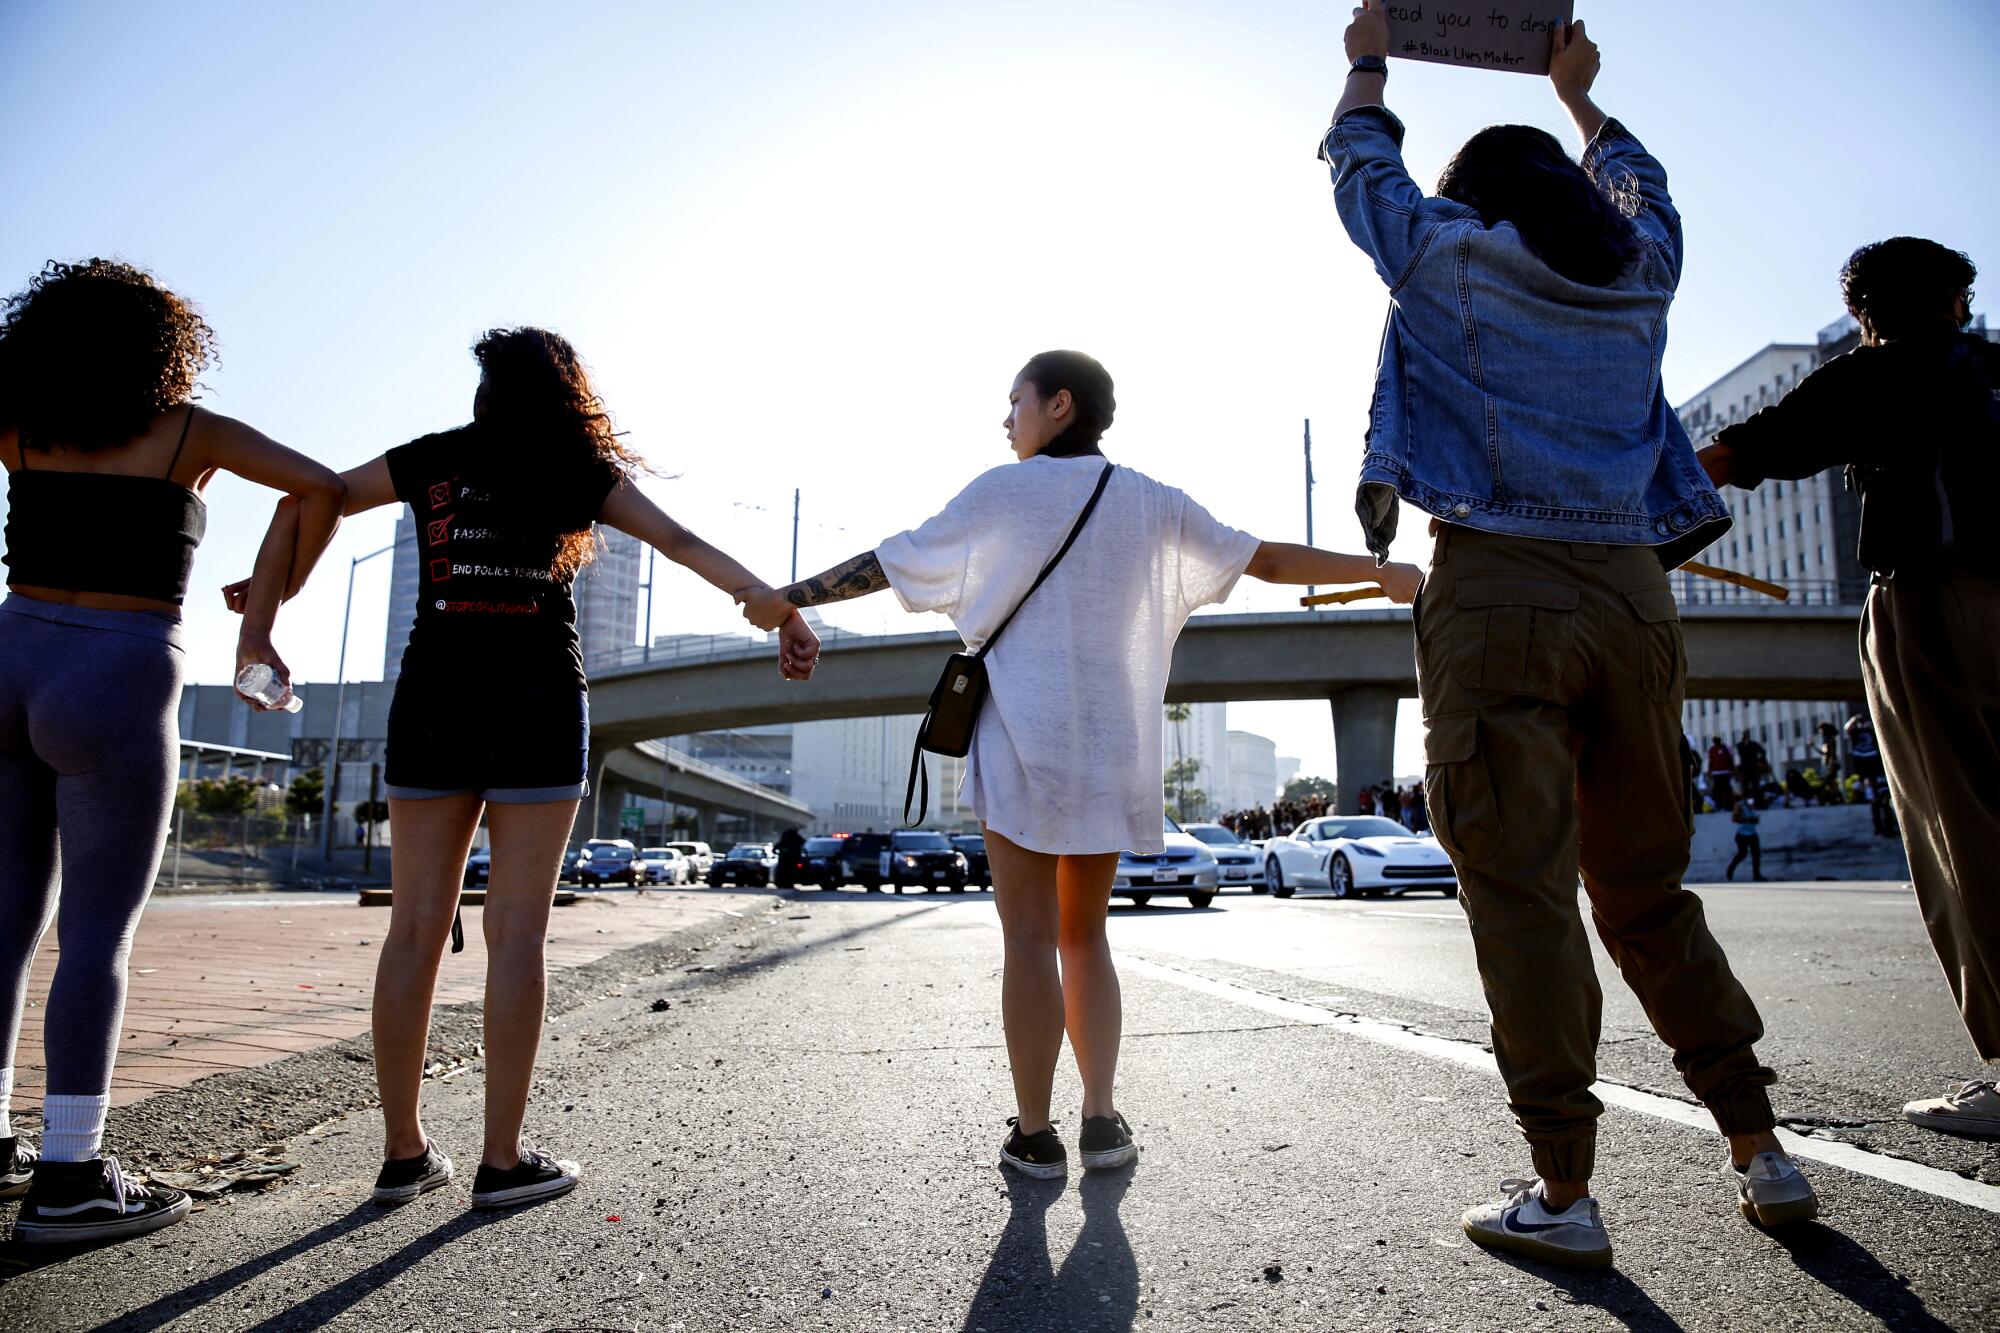 Protesters link arms to block a roadway